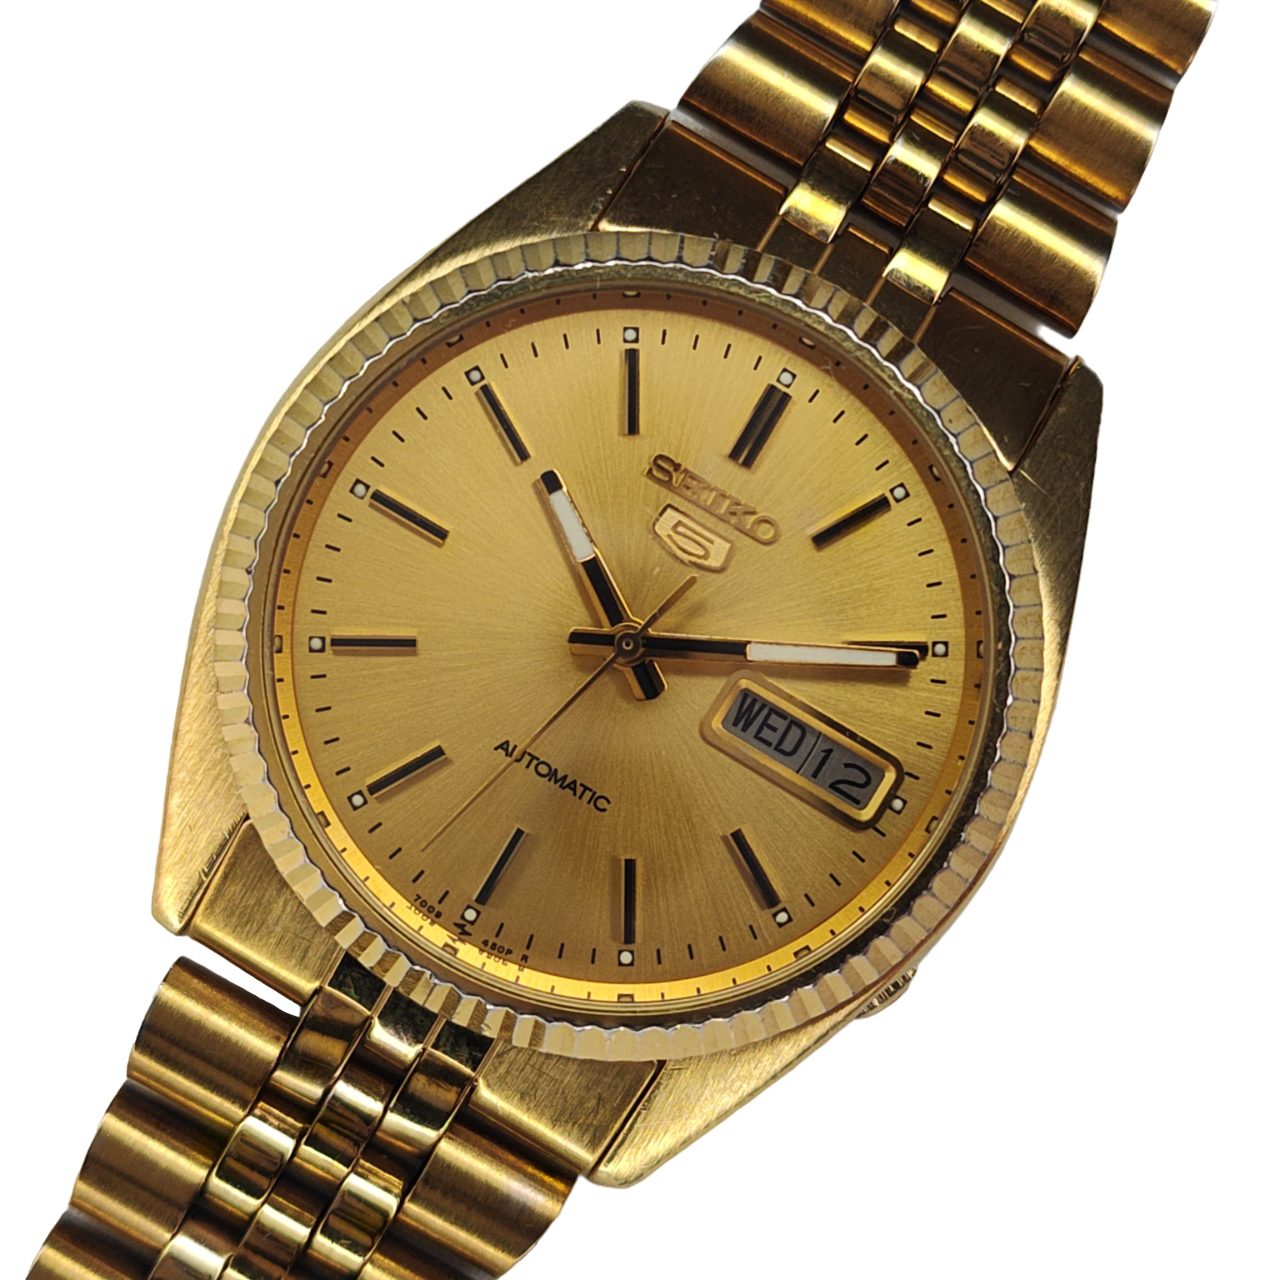 Seiko Datejust SNJX94 Automatic 7009-3110 Circa 1992 Rare Discontinued –  Temple of Time